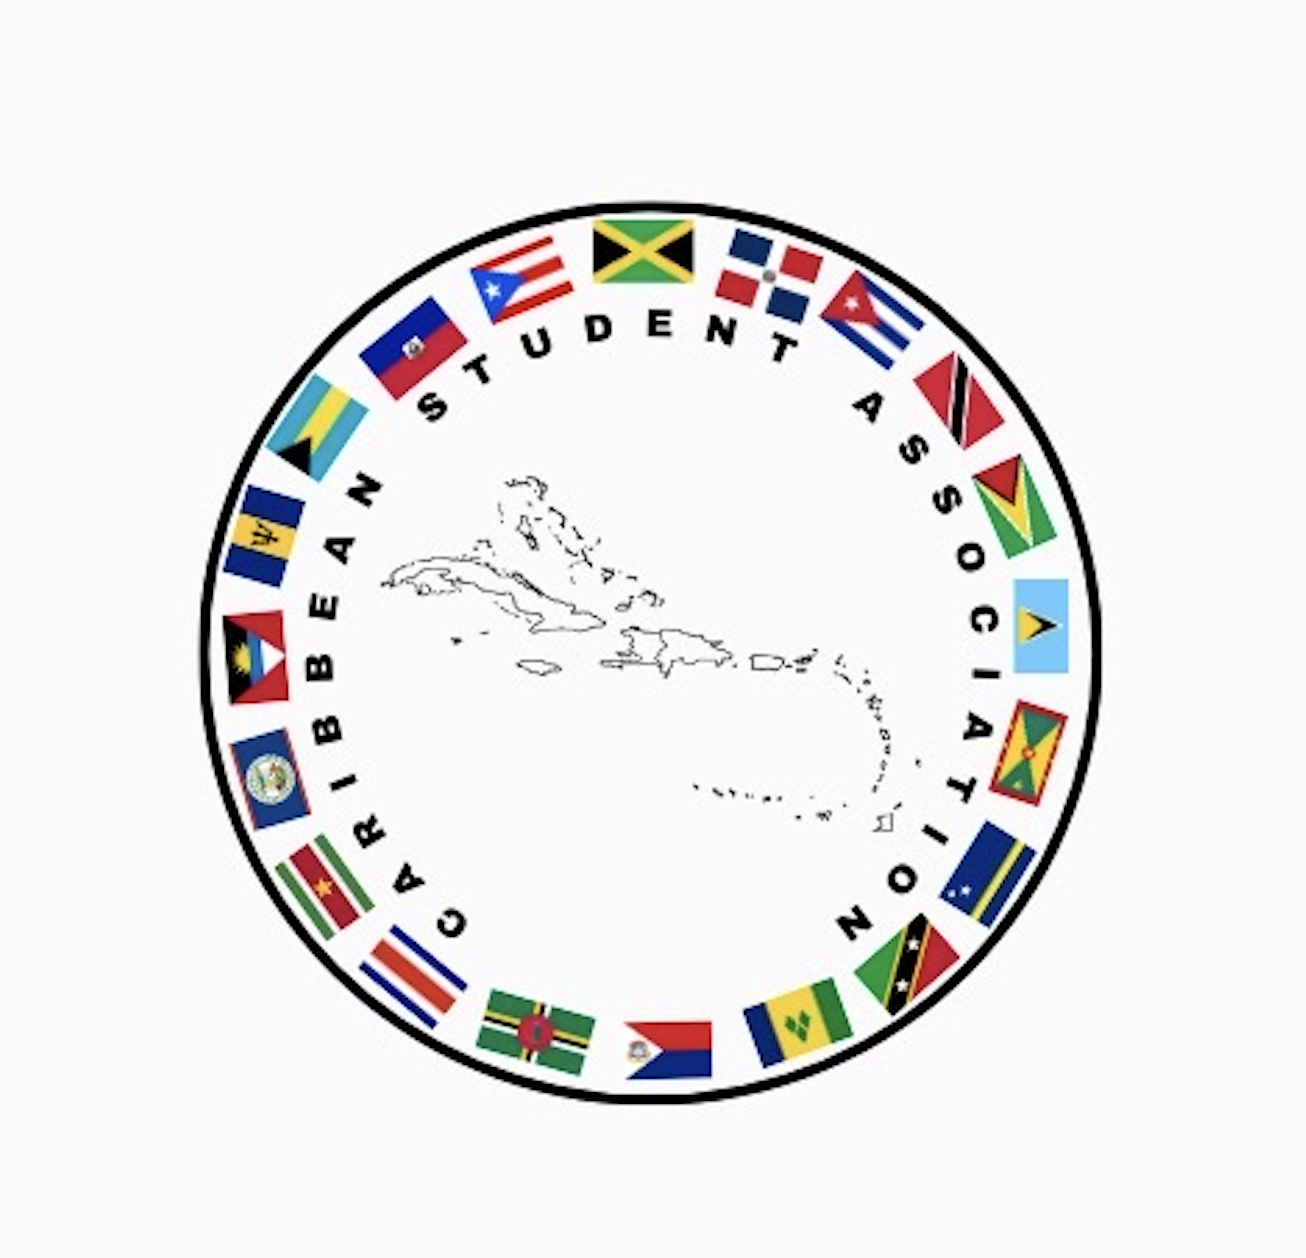 Caribbean Student Association will connect existing community